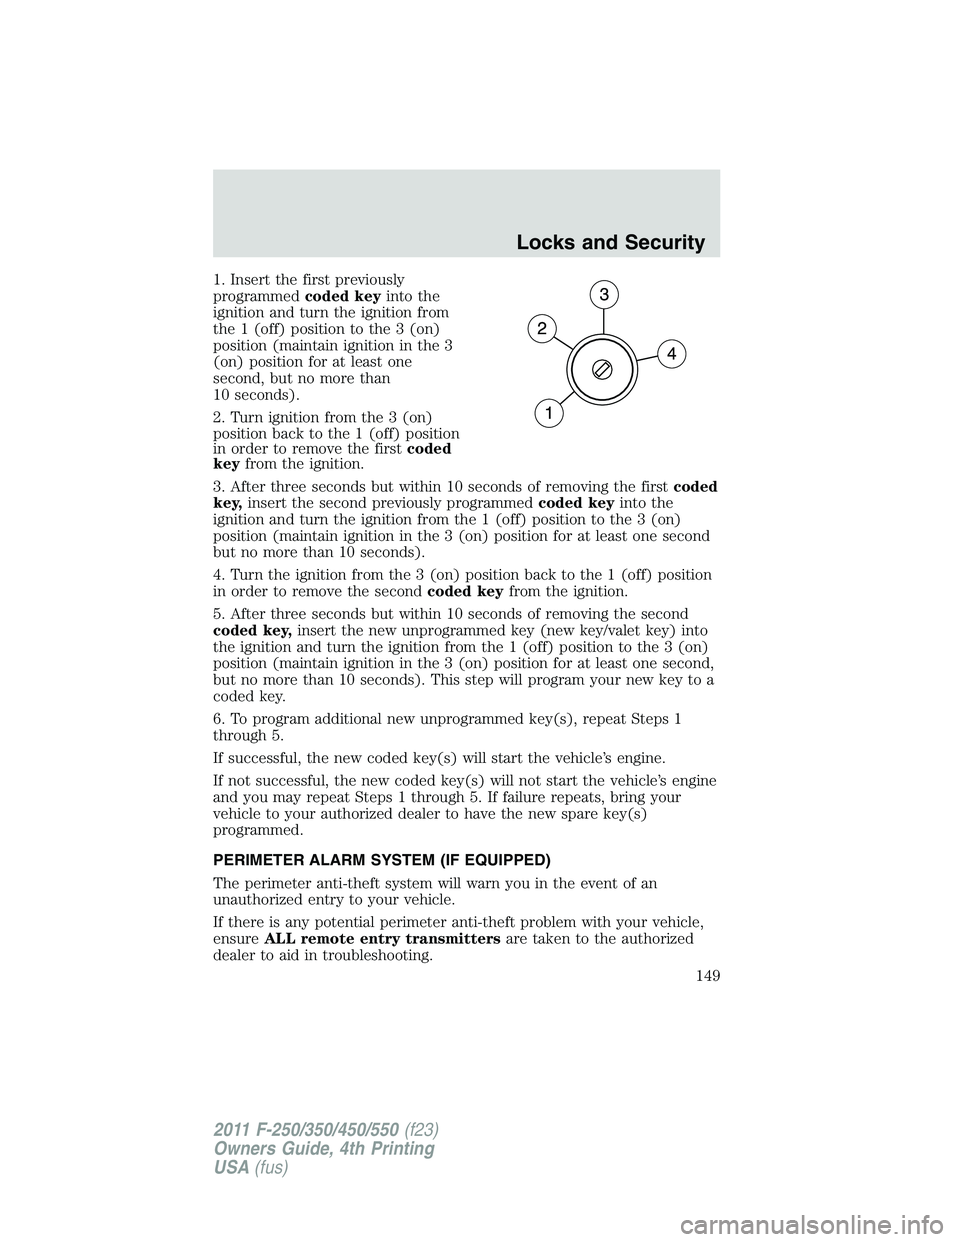 FORD F450 2011  Owners Manual 1. Insert the first previously
programmed coded key into the
ignition and turn the ignition from
the 1 (off) position to the 3 (on)
position (maintain ignition in the 3
(on) position for at least one
